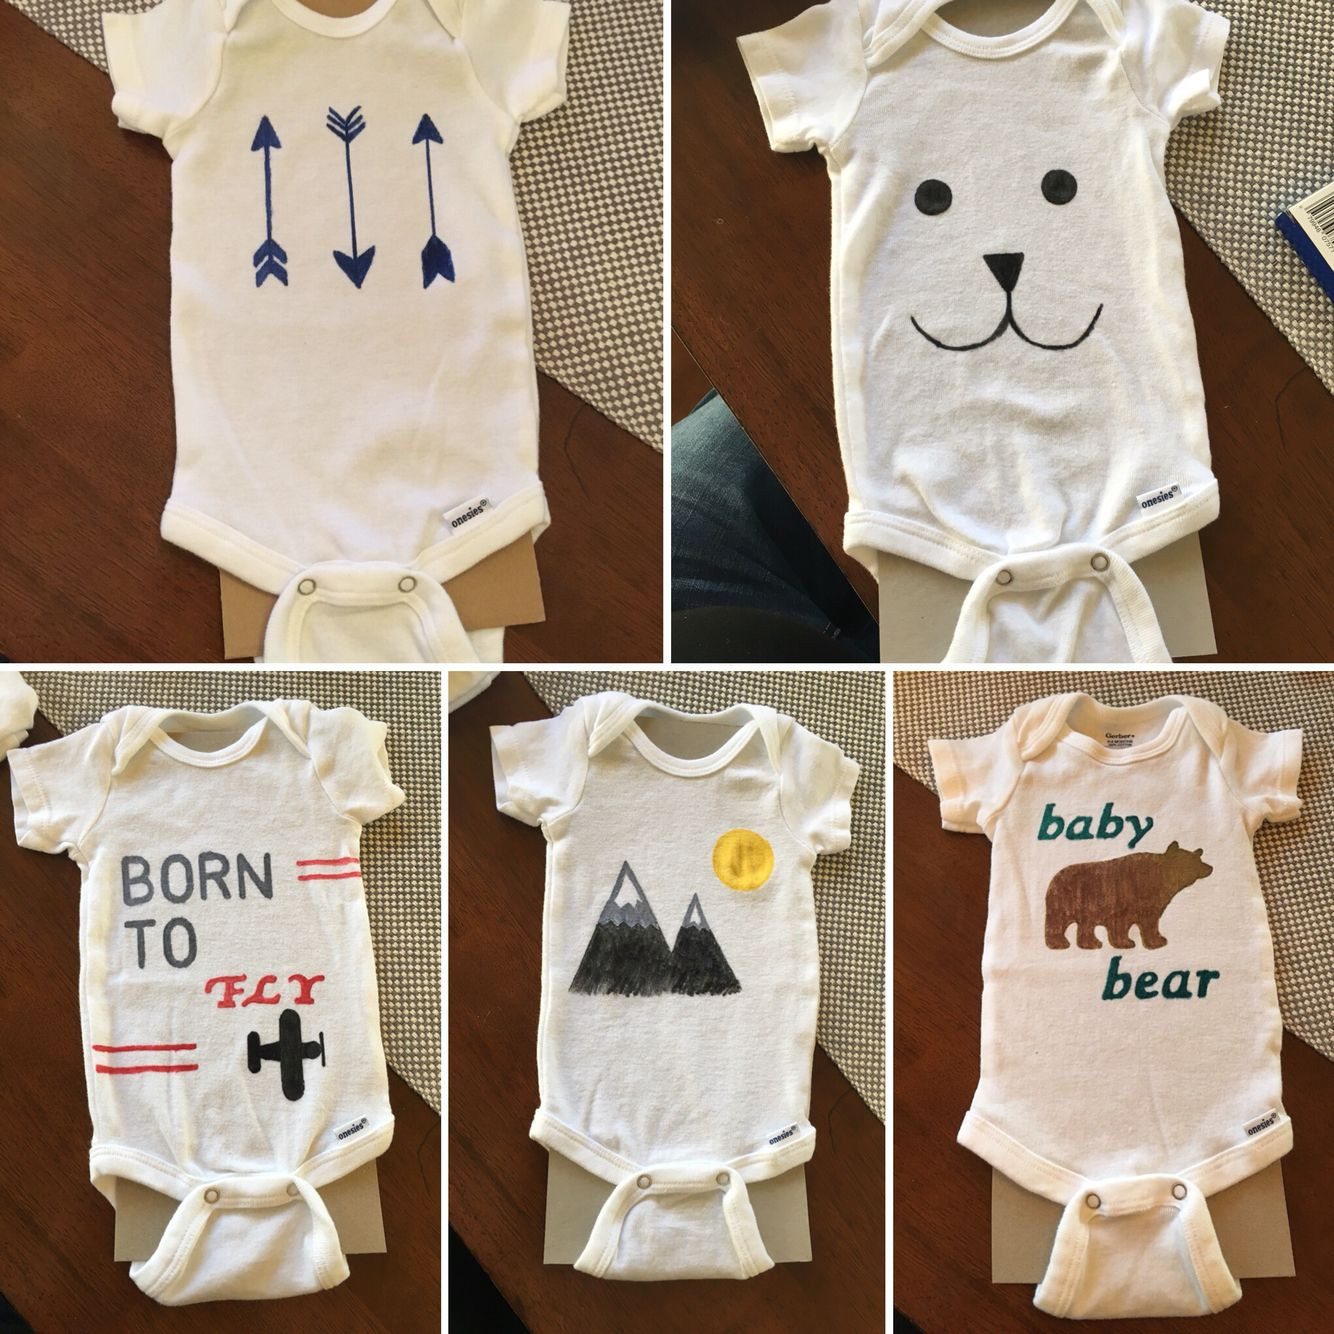 Baby Shower Onesie Decorating Ideas
 DIY Fabric marker onesies pleted projects